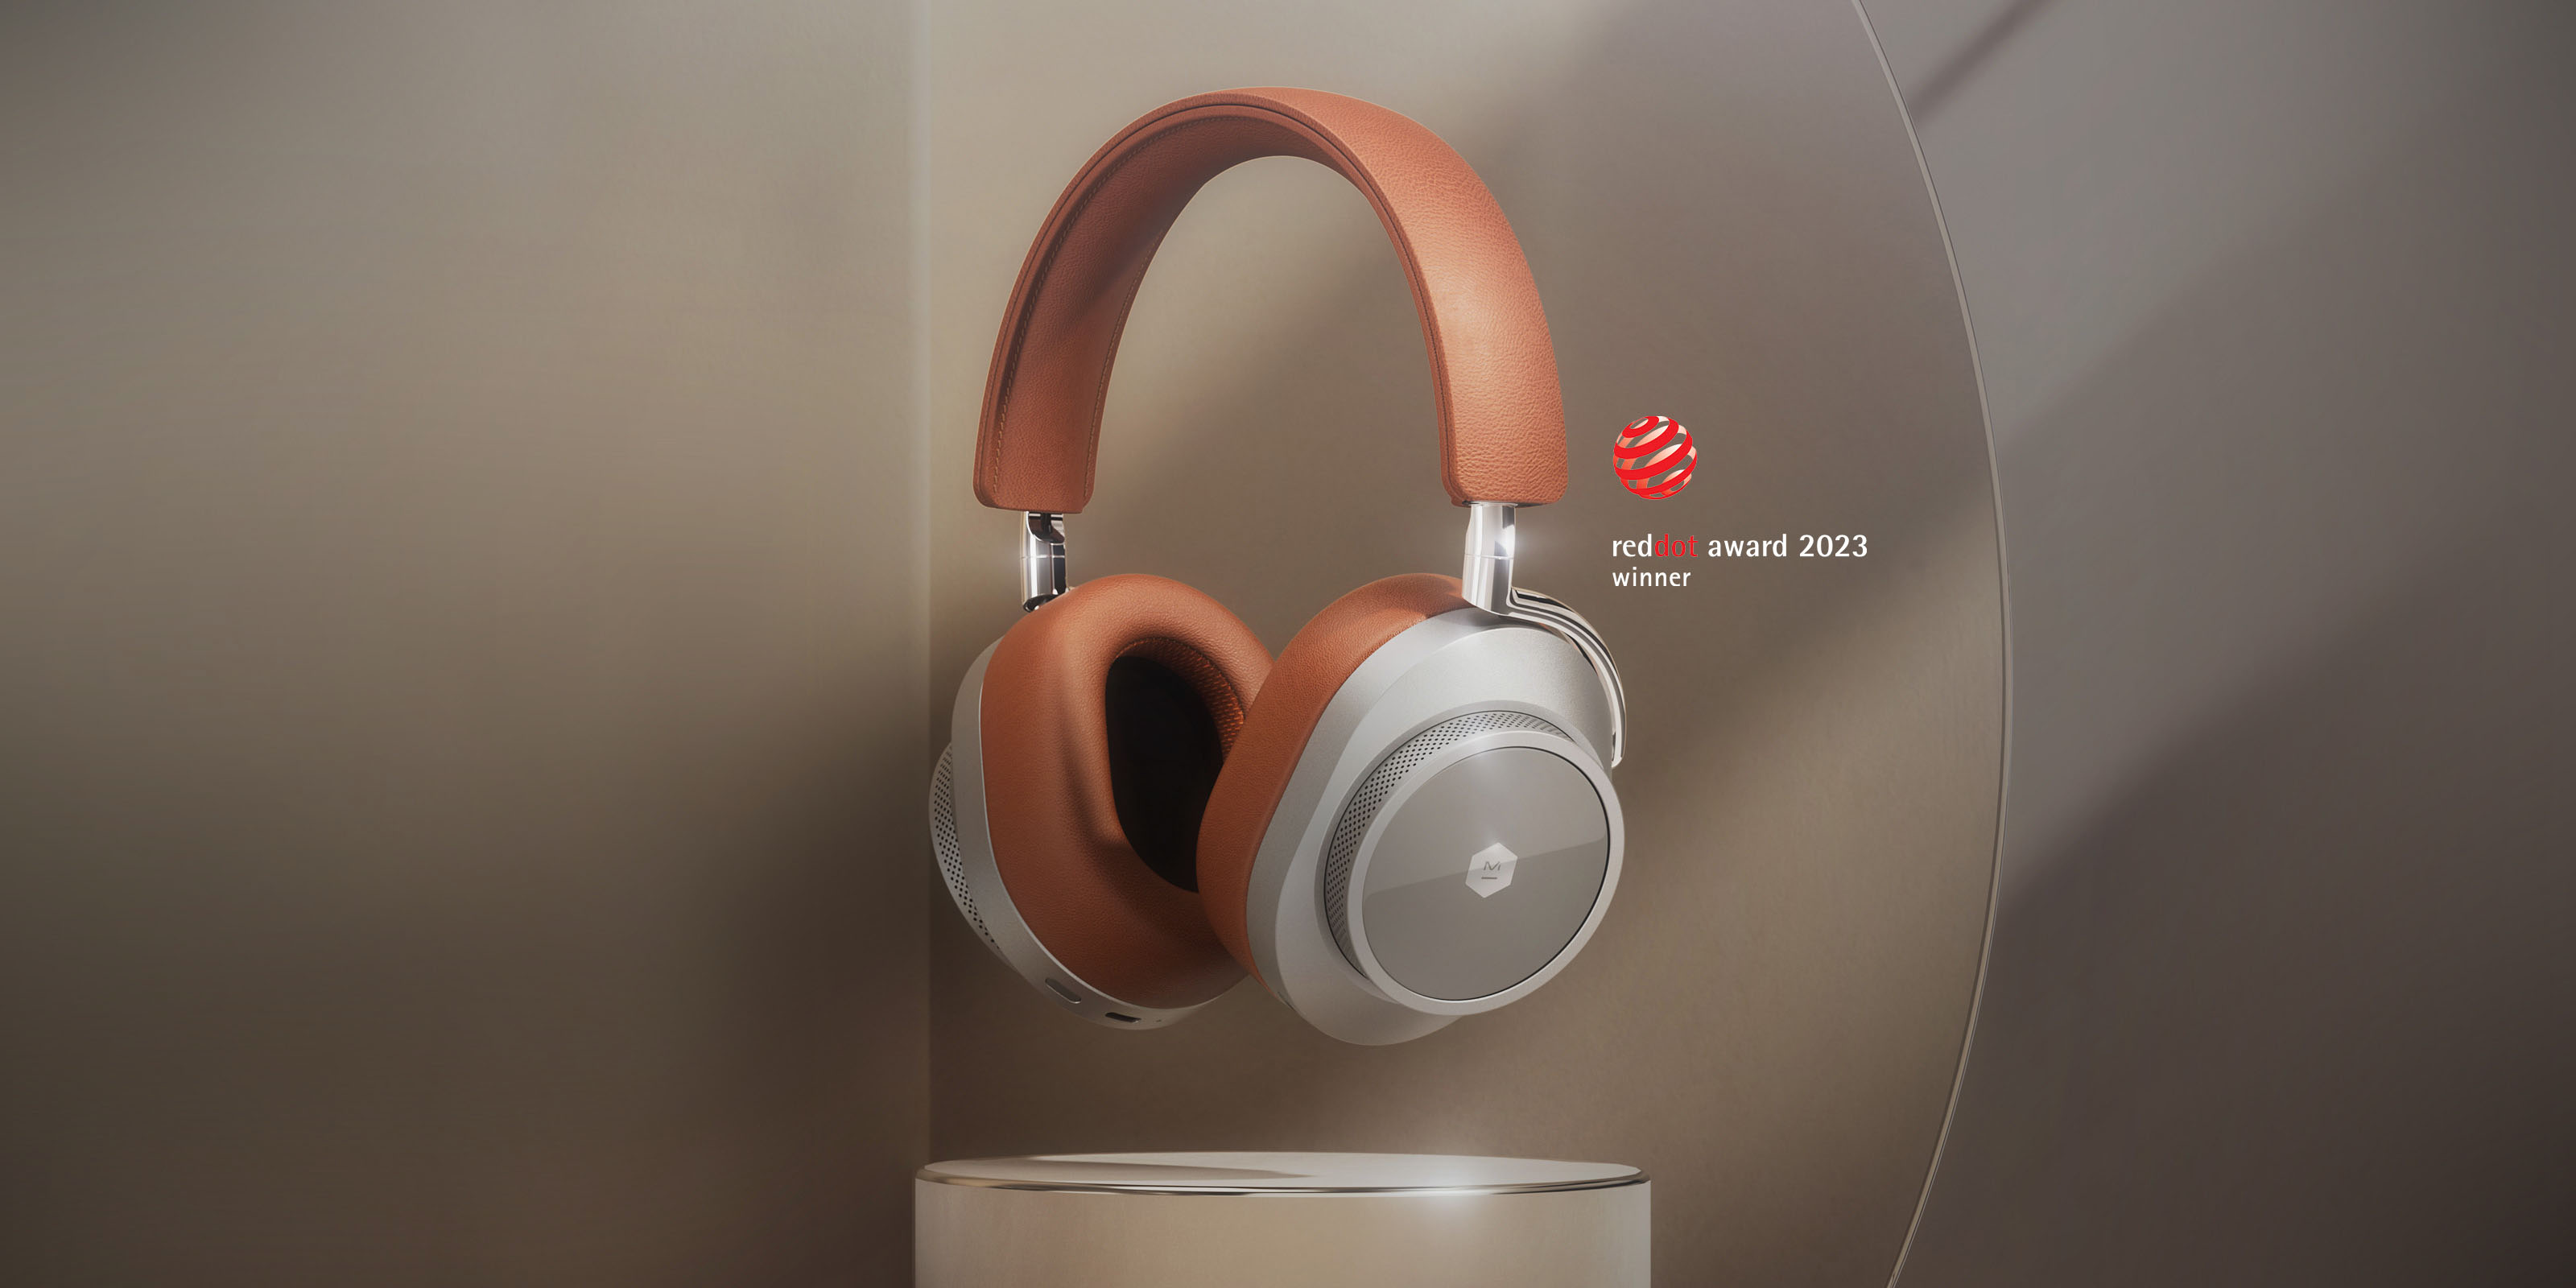 MW75 Active Noise-Cancelling Wireless Headphones Awarded A 2023 Red Dot Design Award In Product Design